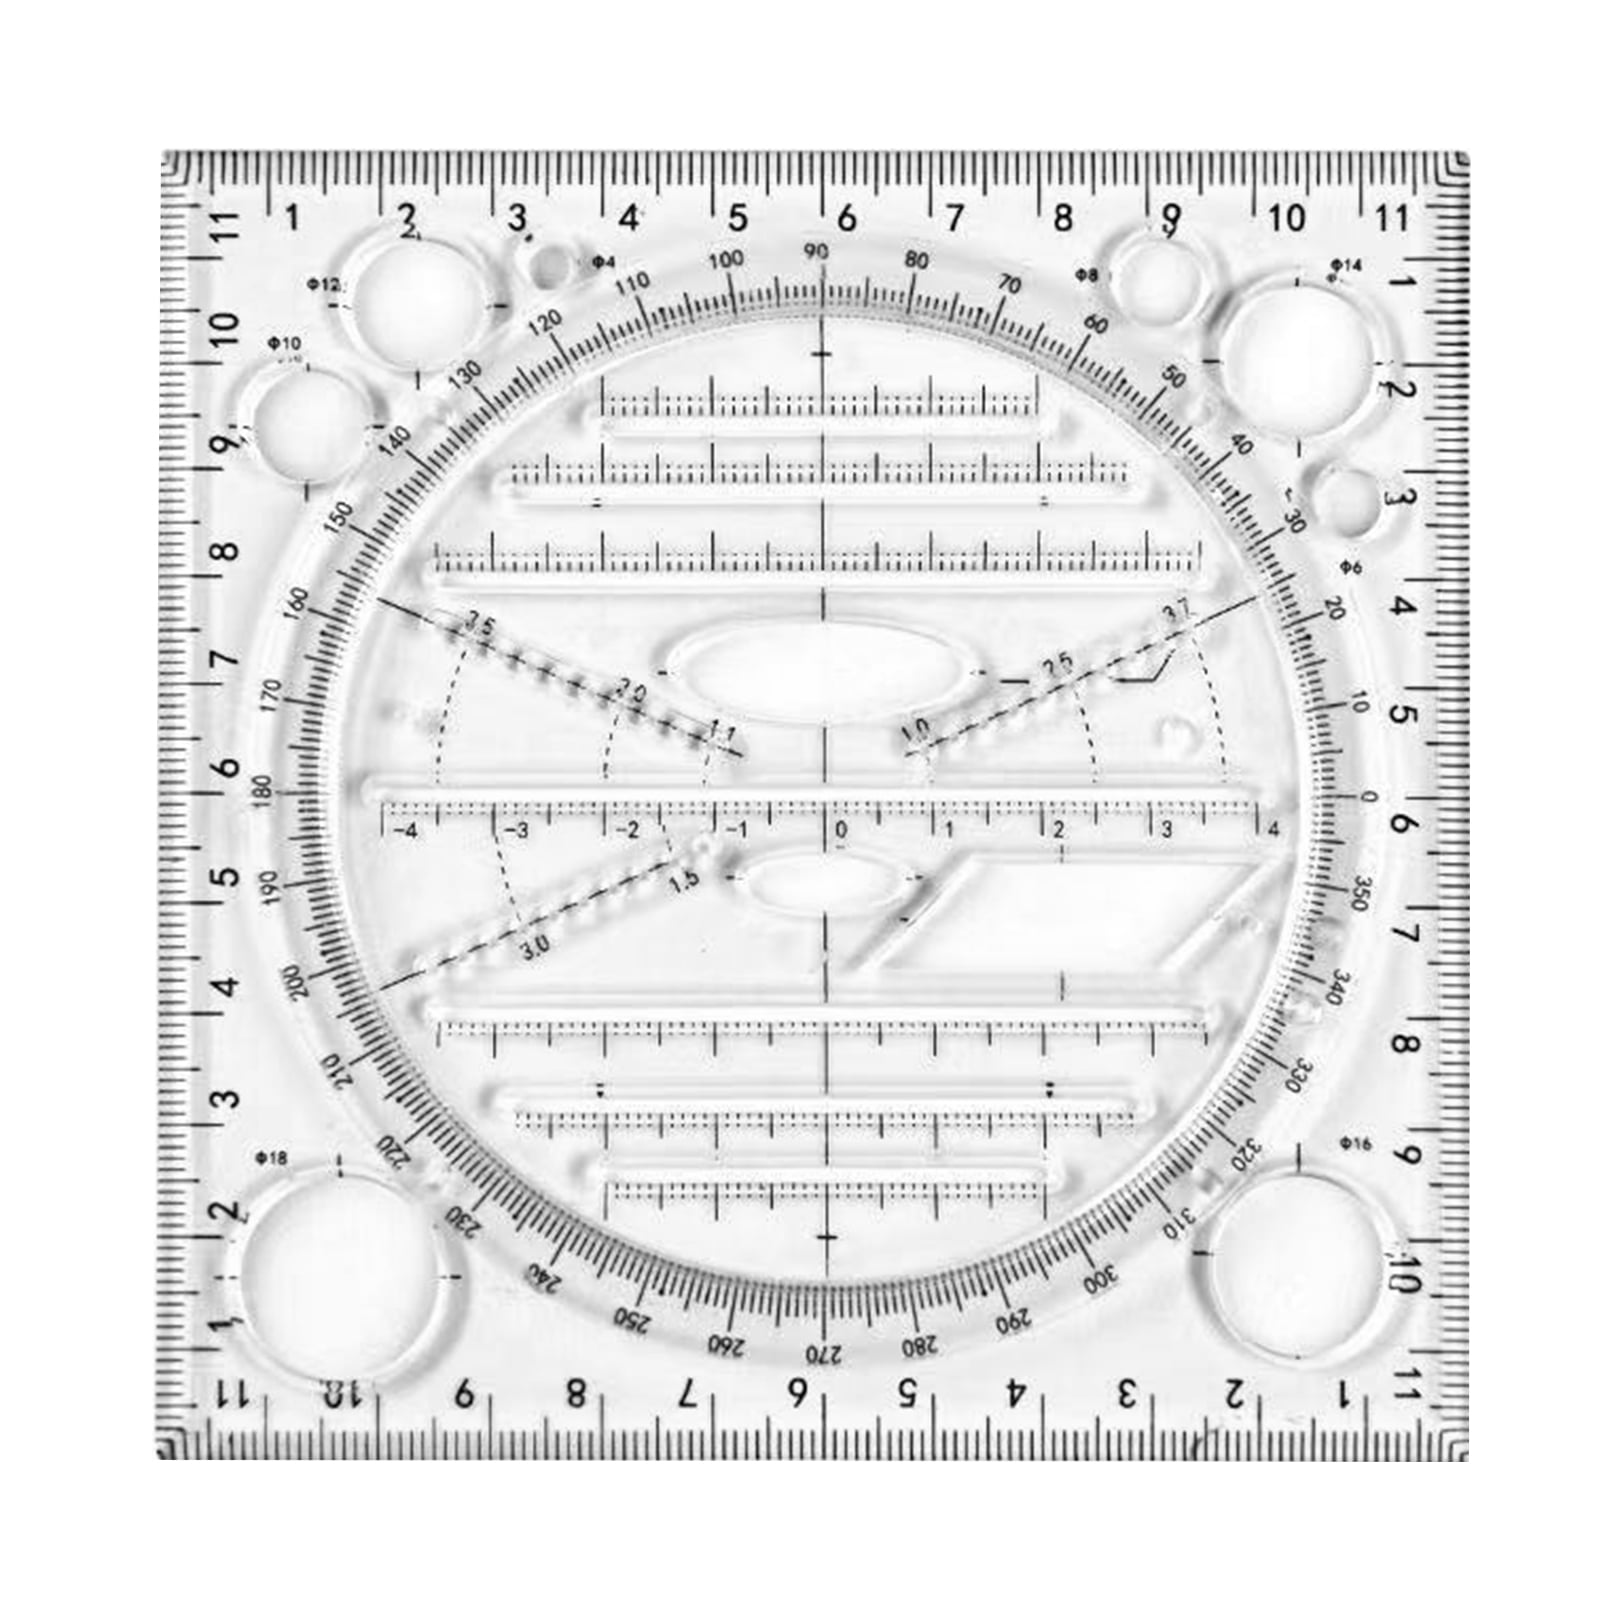 How to Draw Ruler (Tools) Step by Step